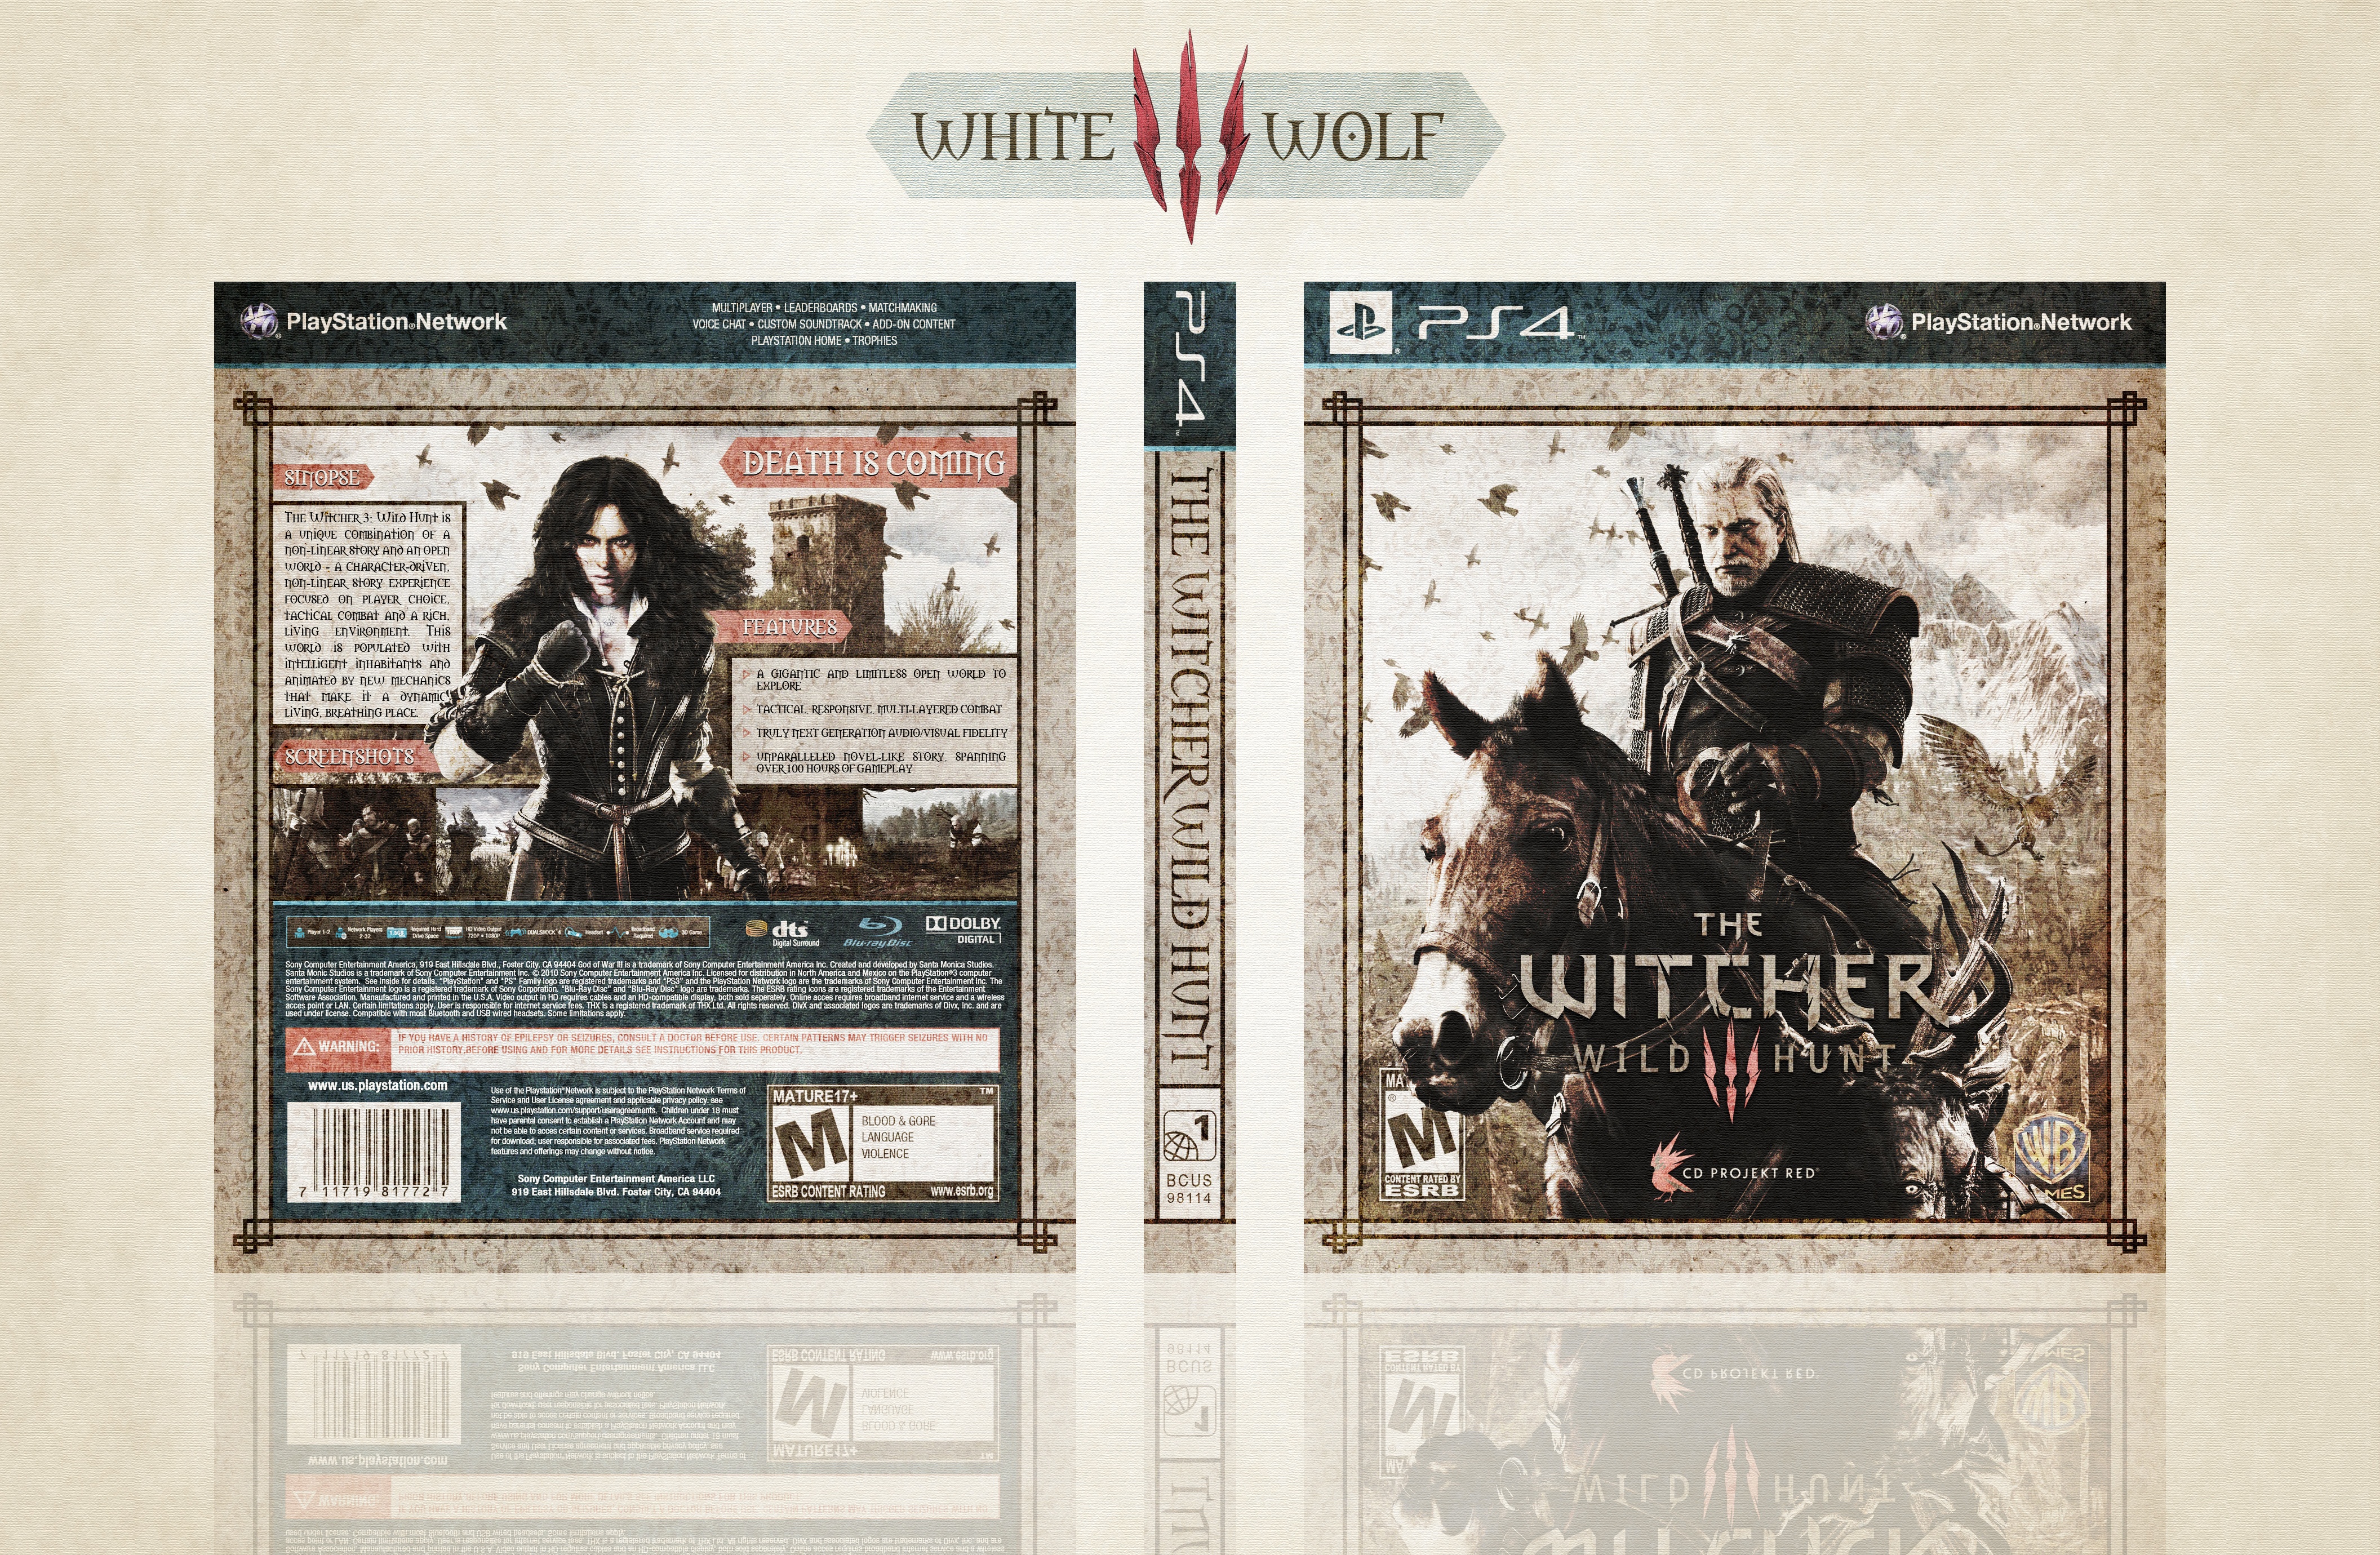 The Witcher 3: Wild Hunt box cover